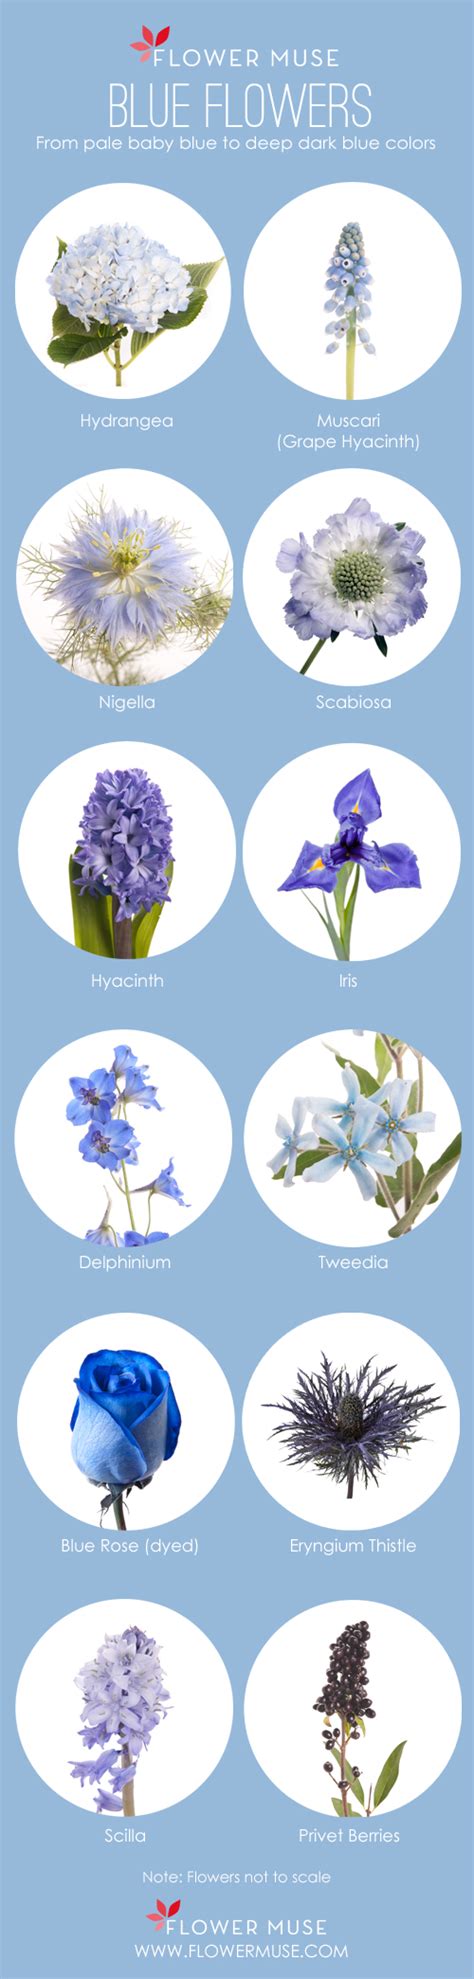 Blue Flowers Names And Meanings Mishkanetcom